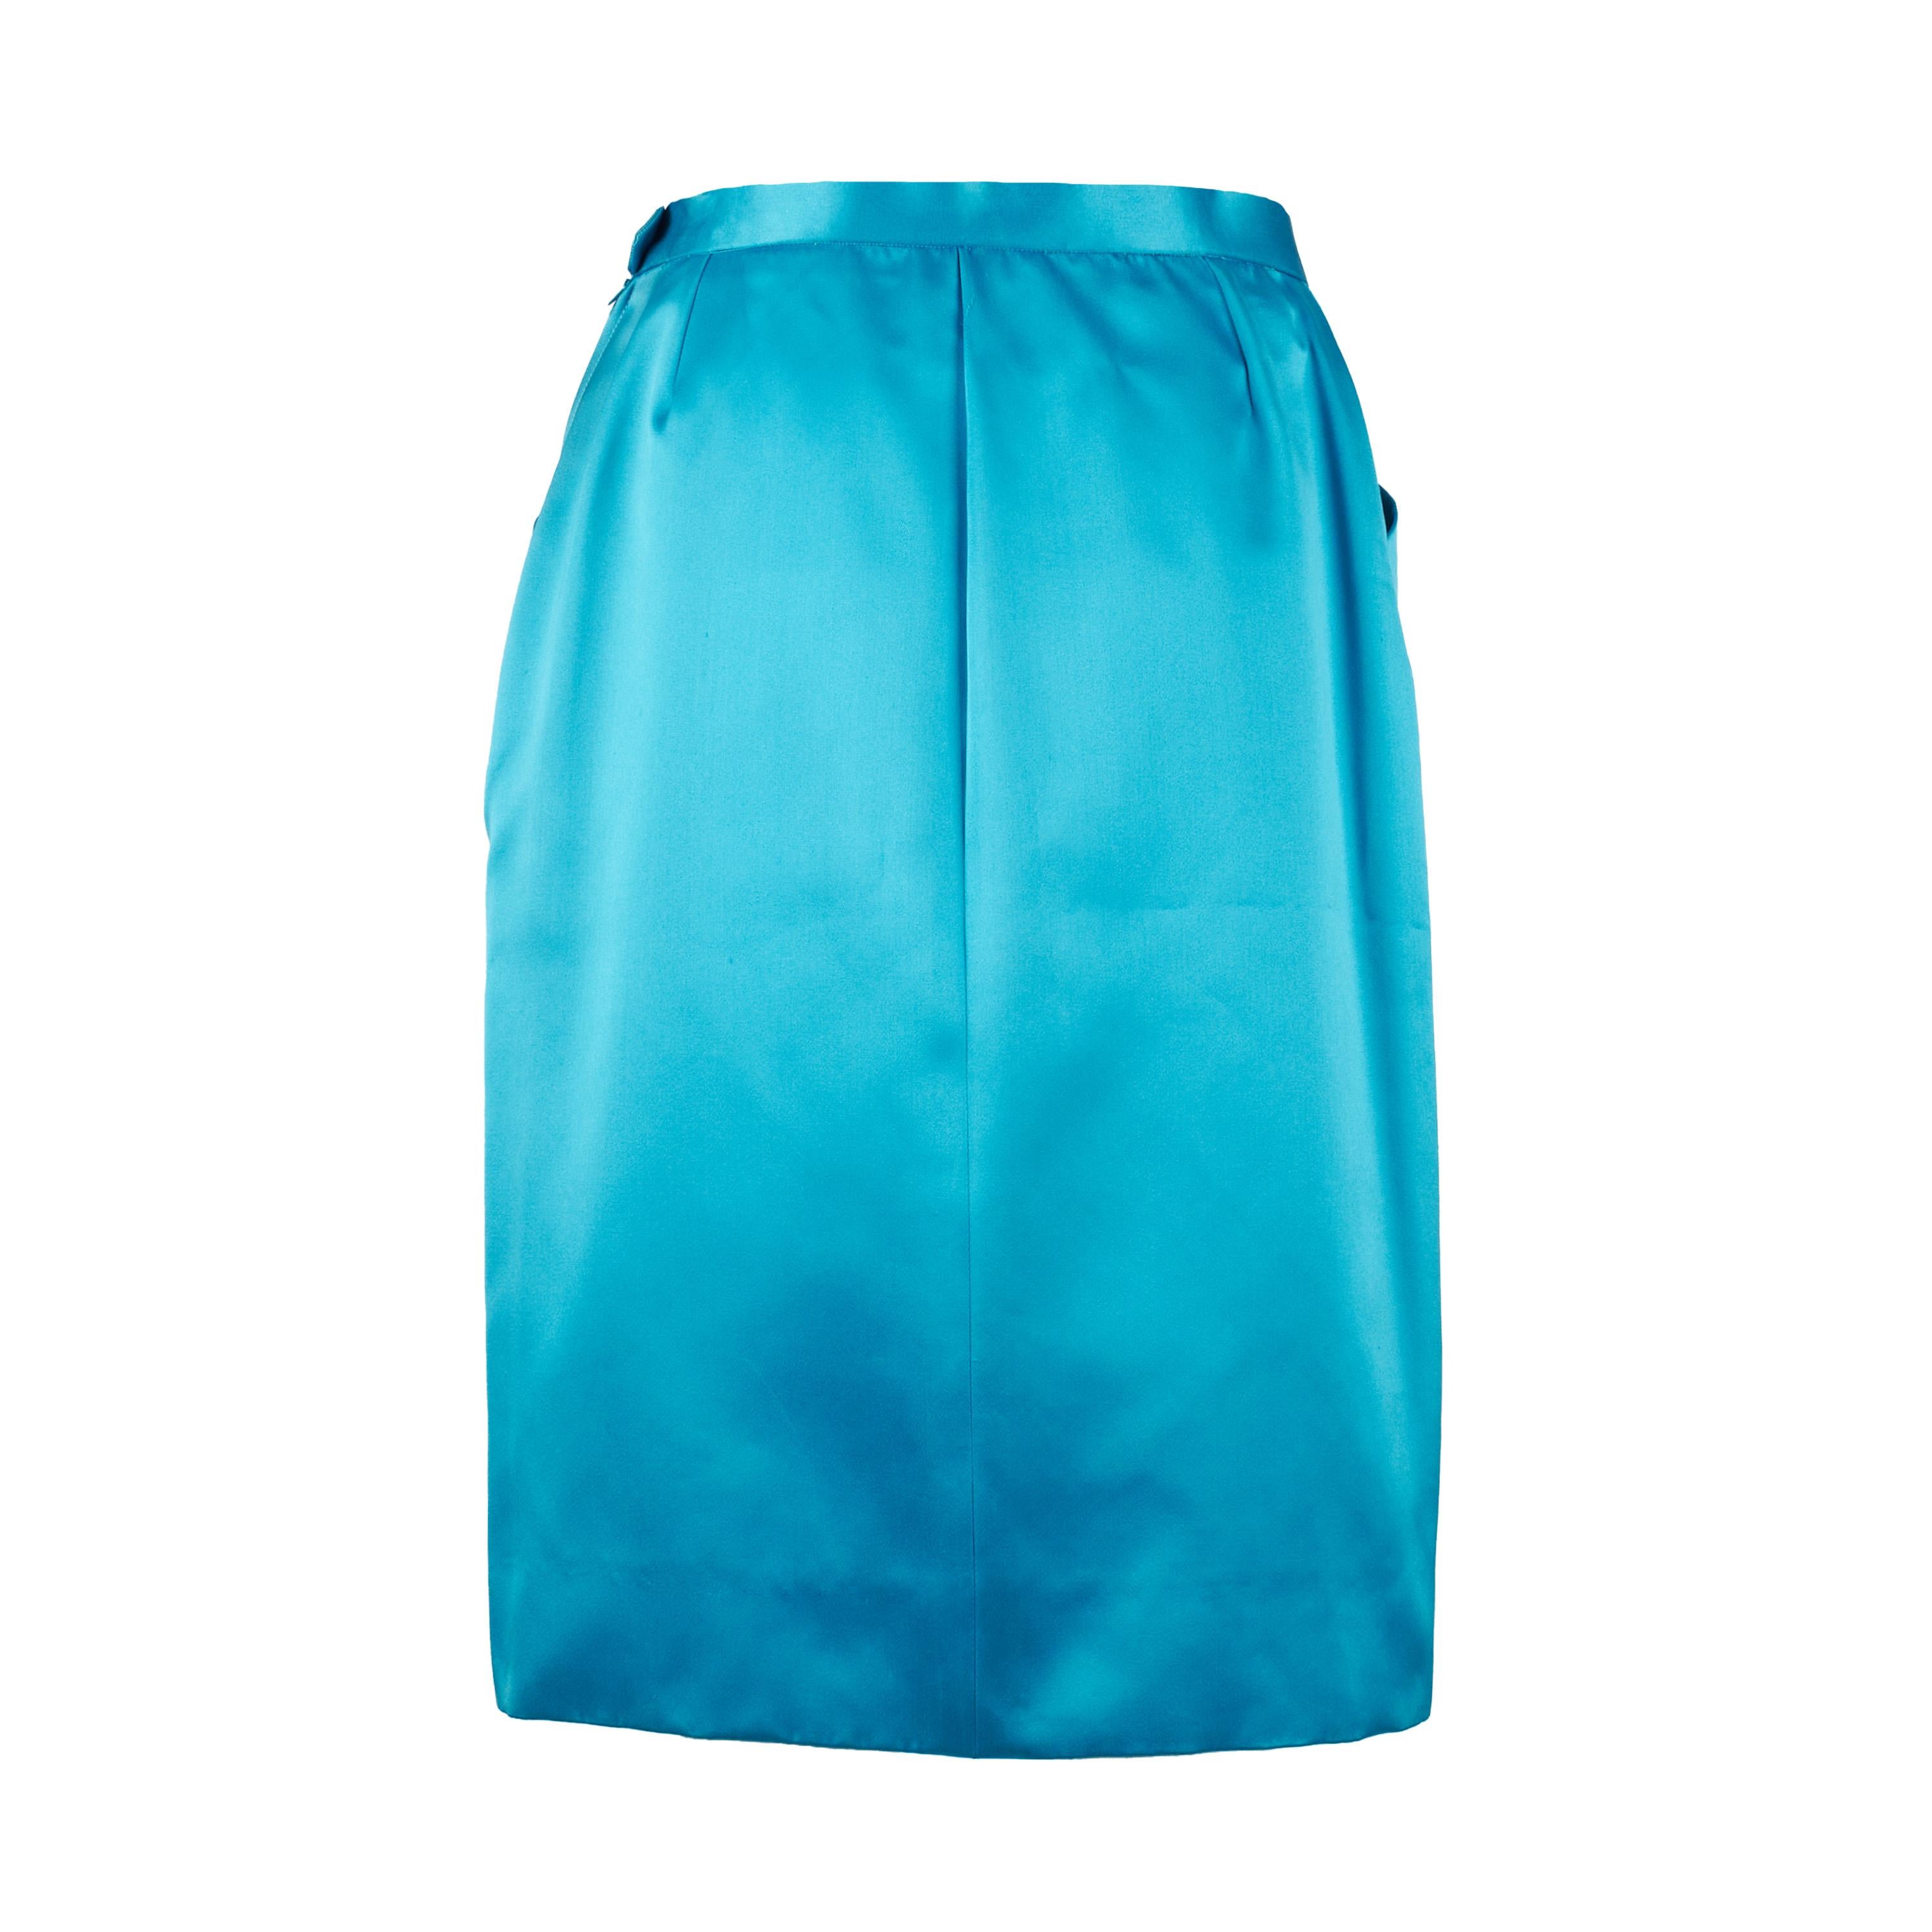 Yves Saint Laurent Rive Gauche Satin Pencil Skirt  In Good Condition For Sale In Milano, IT